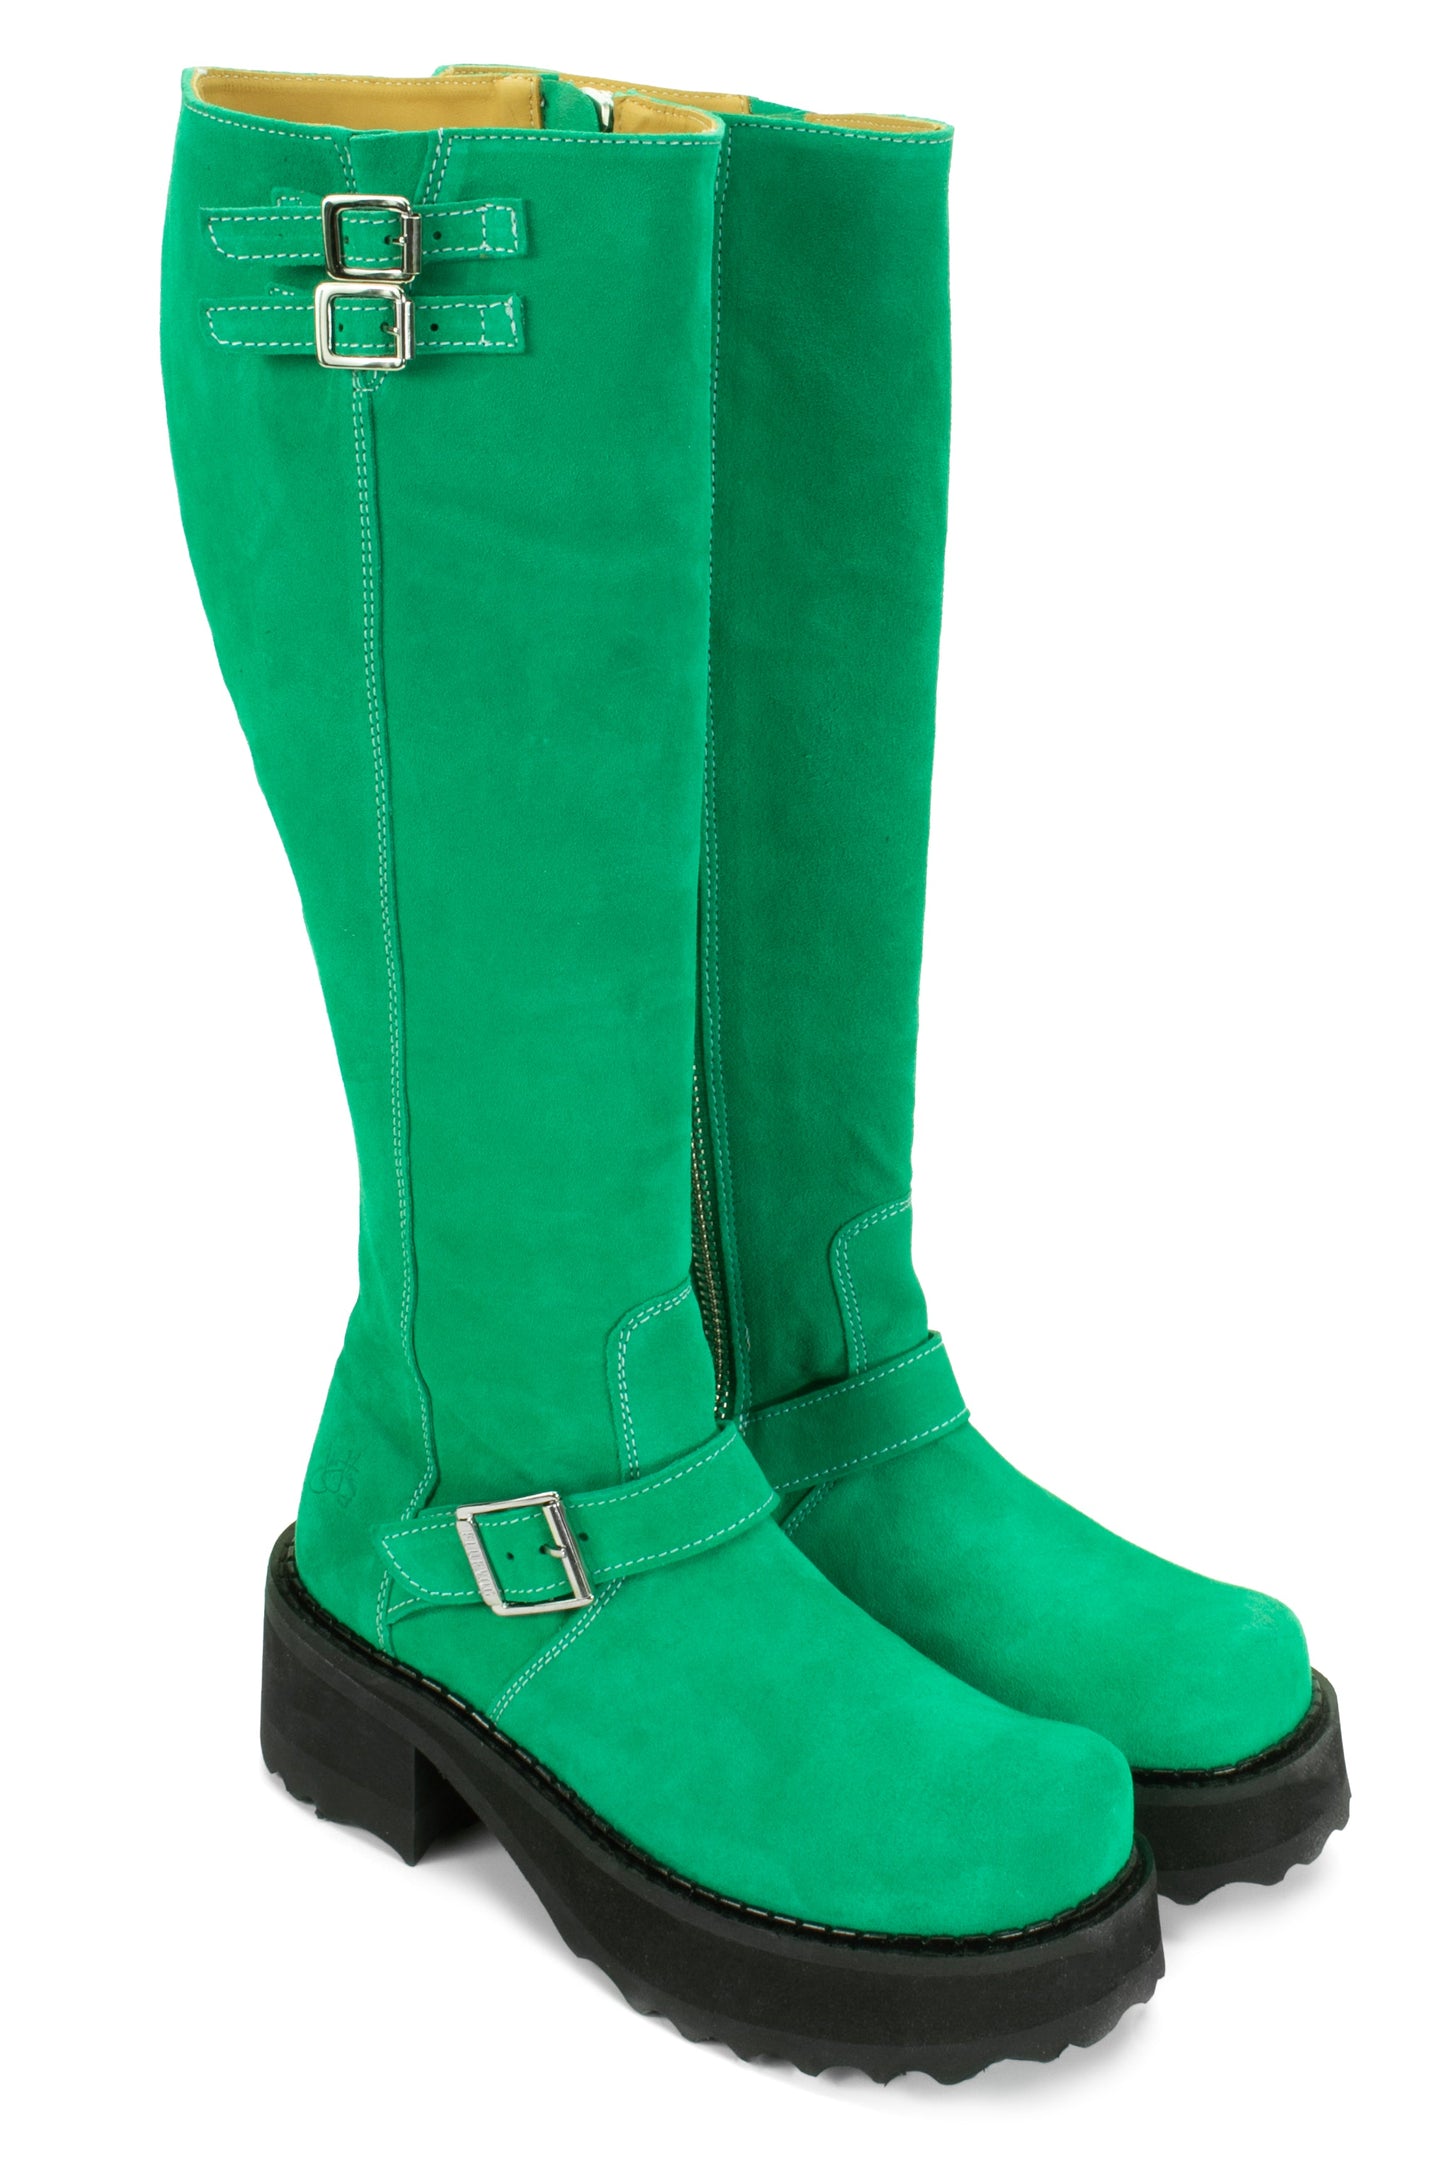 Green suede Boot, under-the-knee, 2 buckles at top, 1 on foot with large belt, high heel 